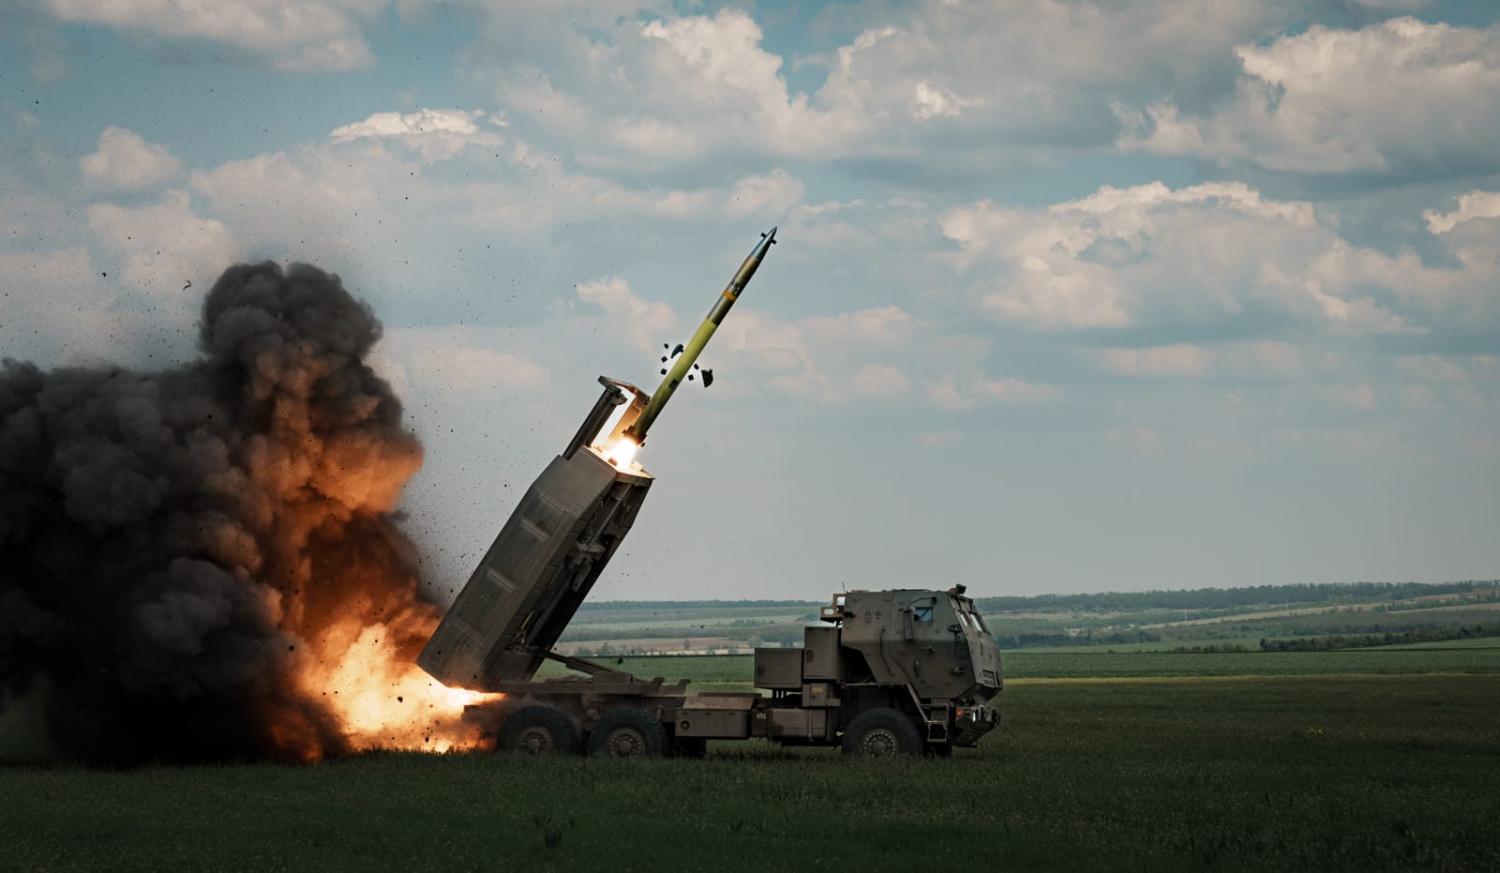 Ukraine received the HIMARS as part of international military assistance programs to help defend itself against the Russian invasion (Serhii Mykhalchuk via Getty Images)